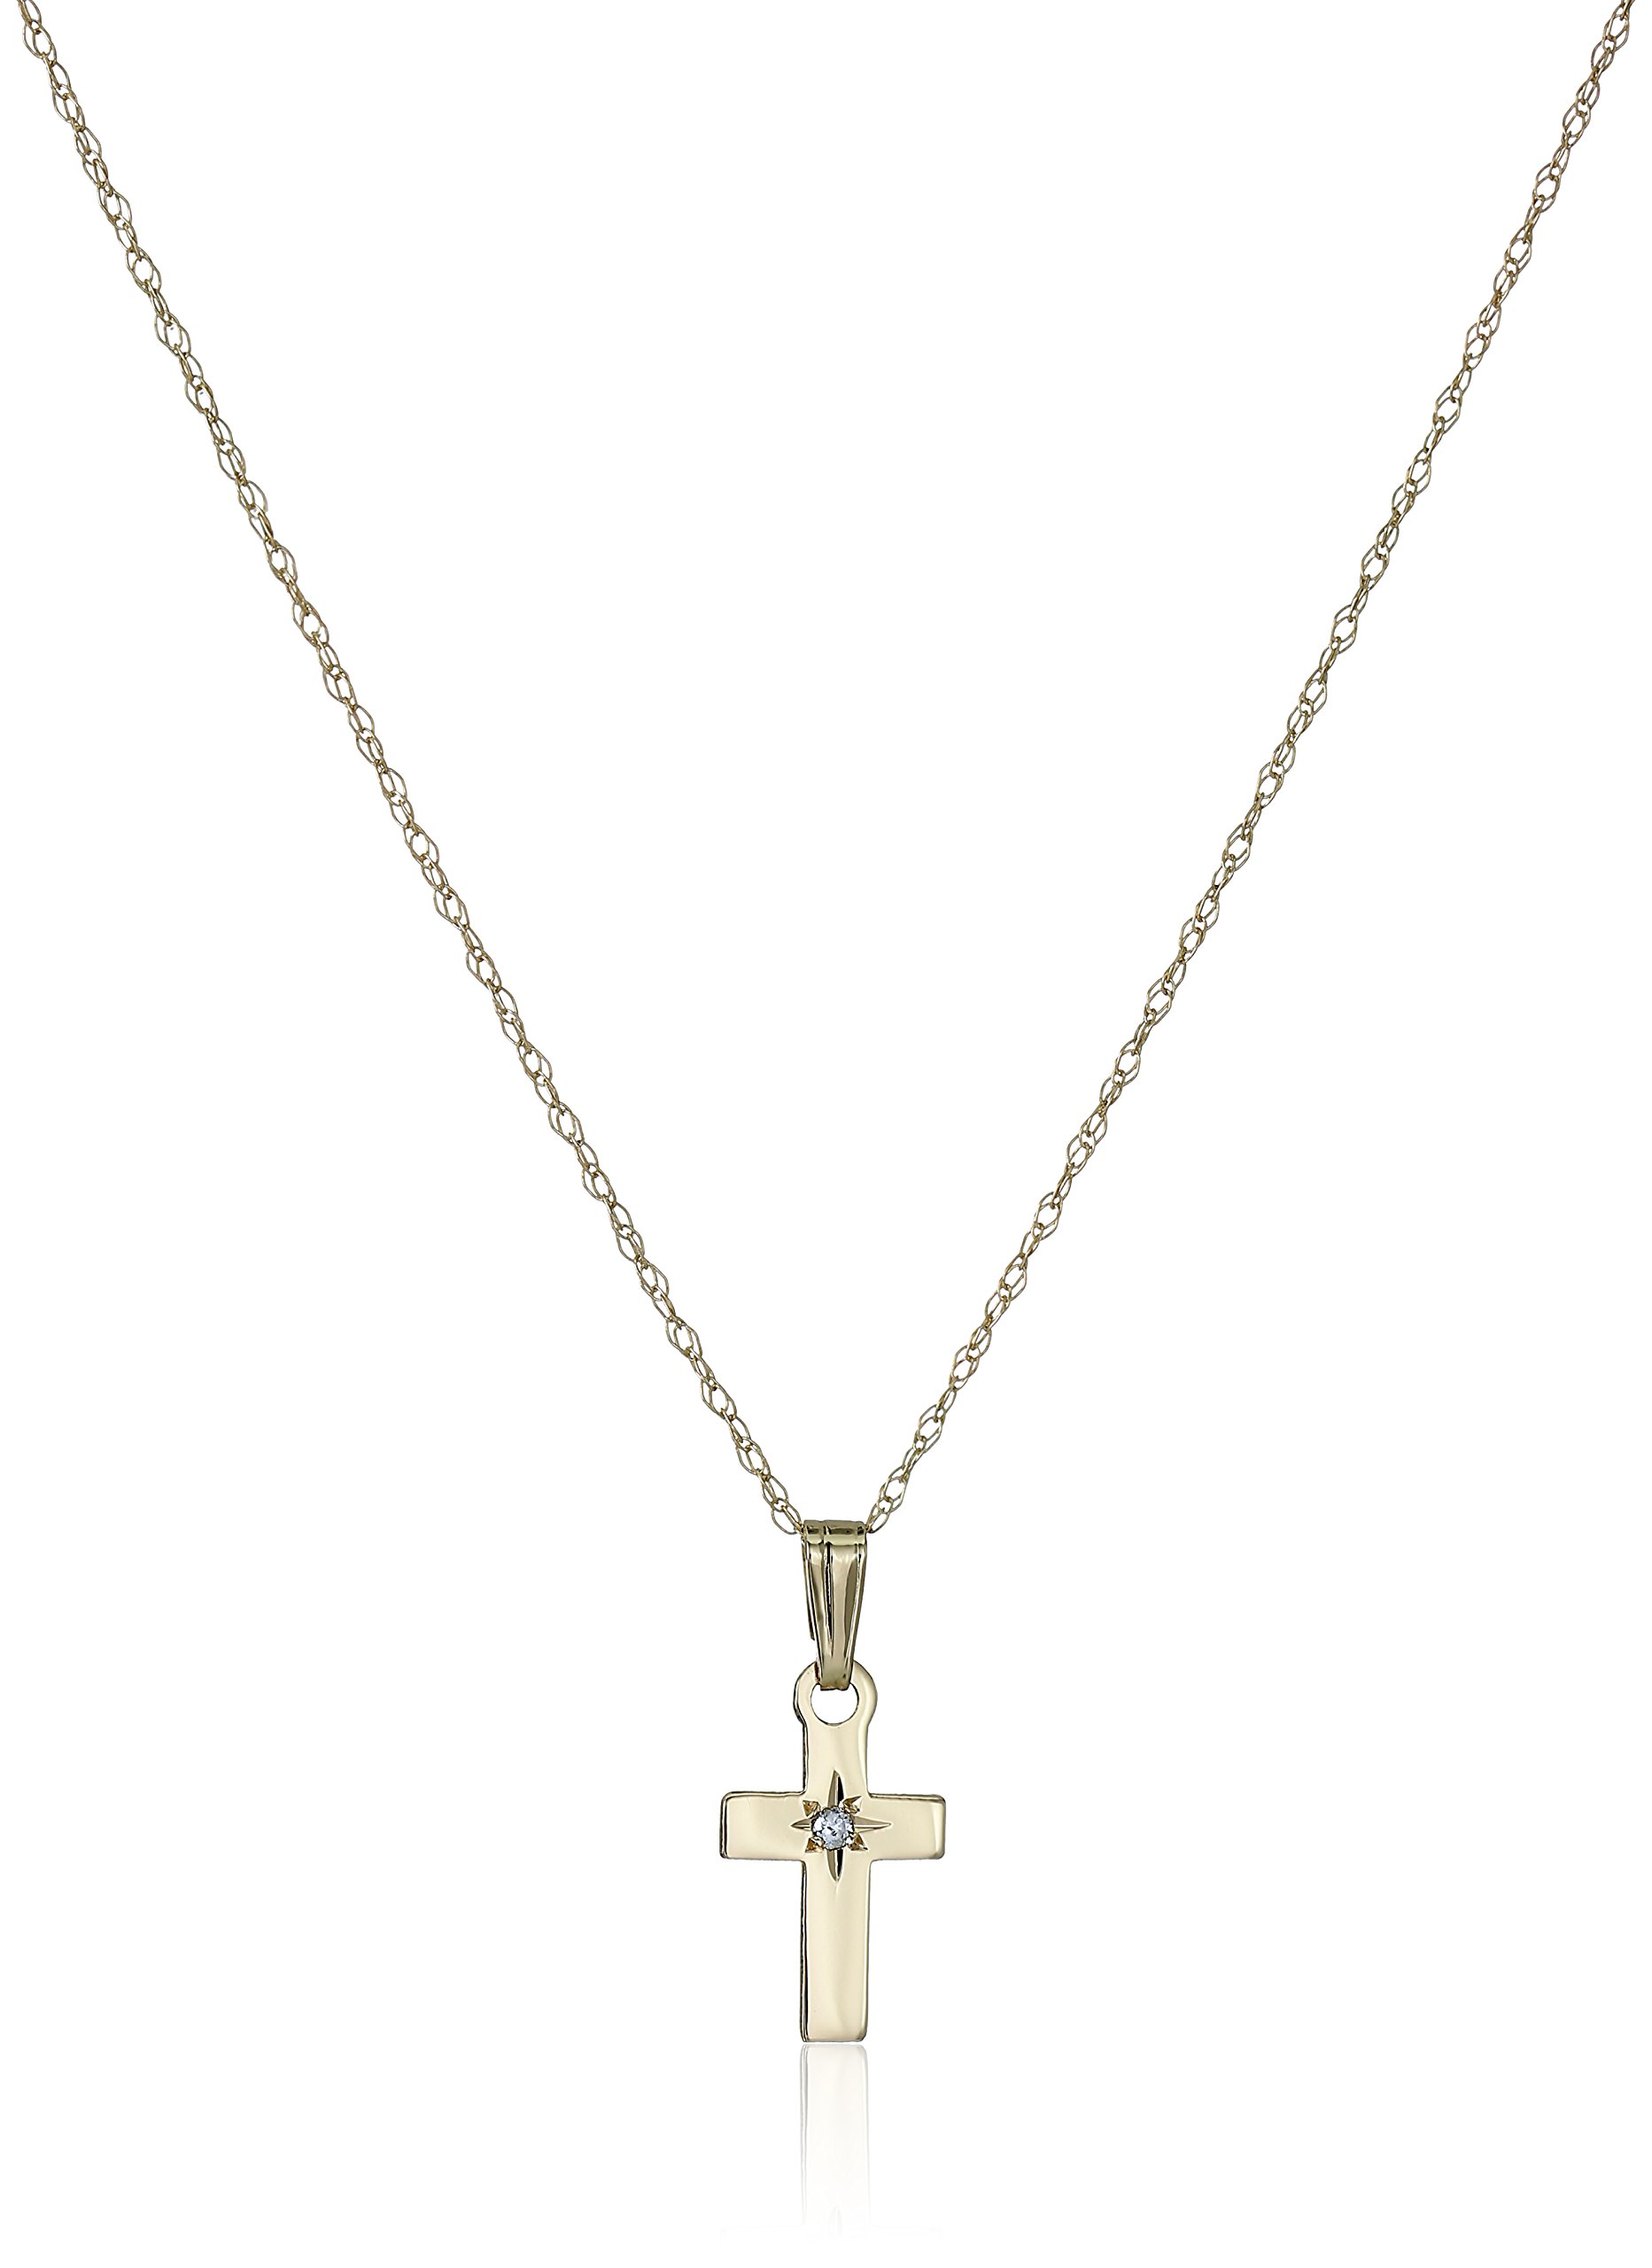 Children's 14k Yellow Gold and Baby's Small Polished Cross Pendant Necklace with Genuine Diamond, 13